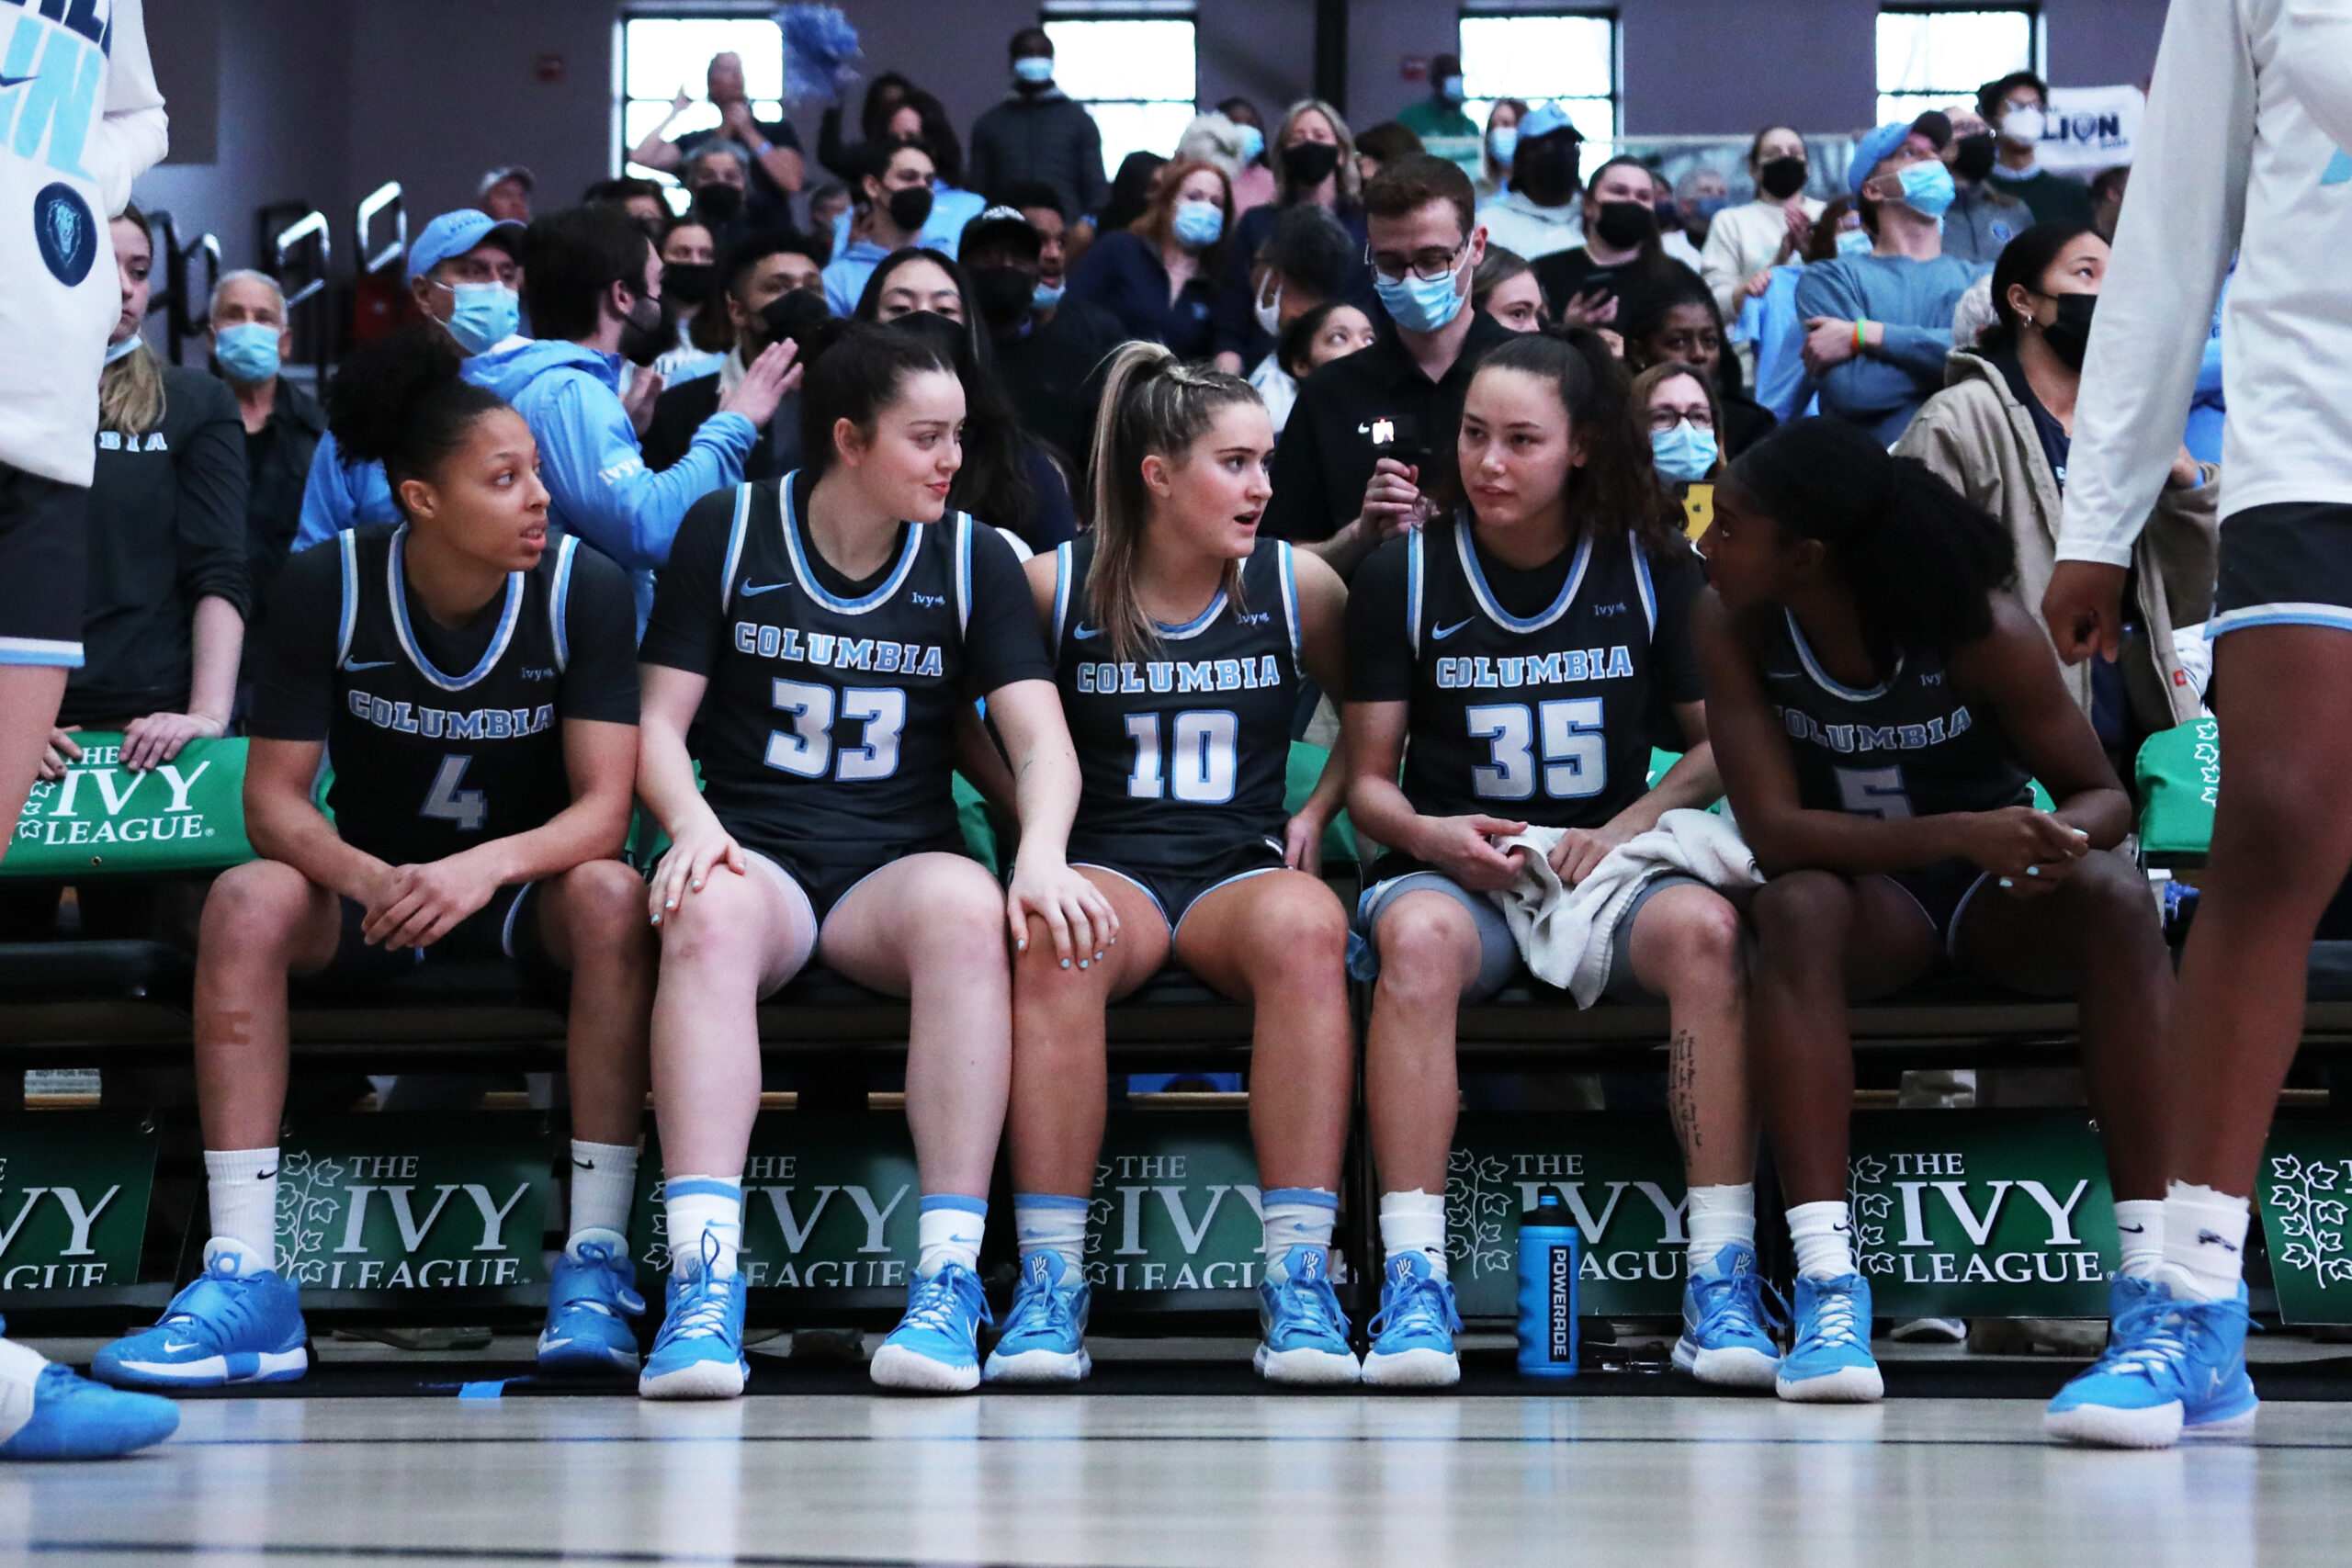 Columbia University Women’s Basketball Team Aims to ‘Support Black Women’ With Campaign